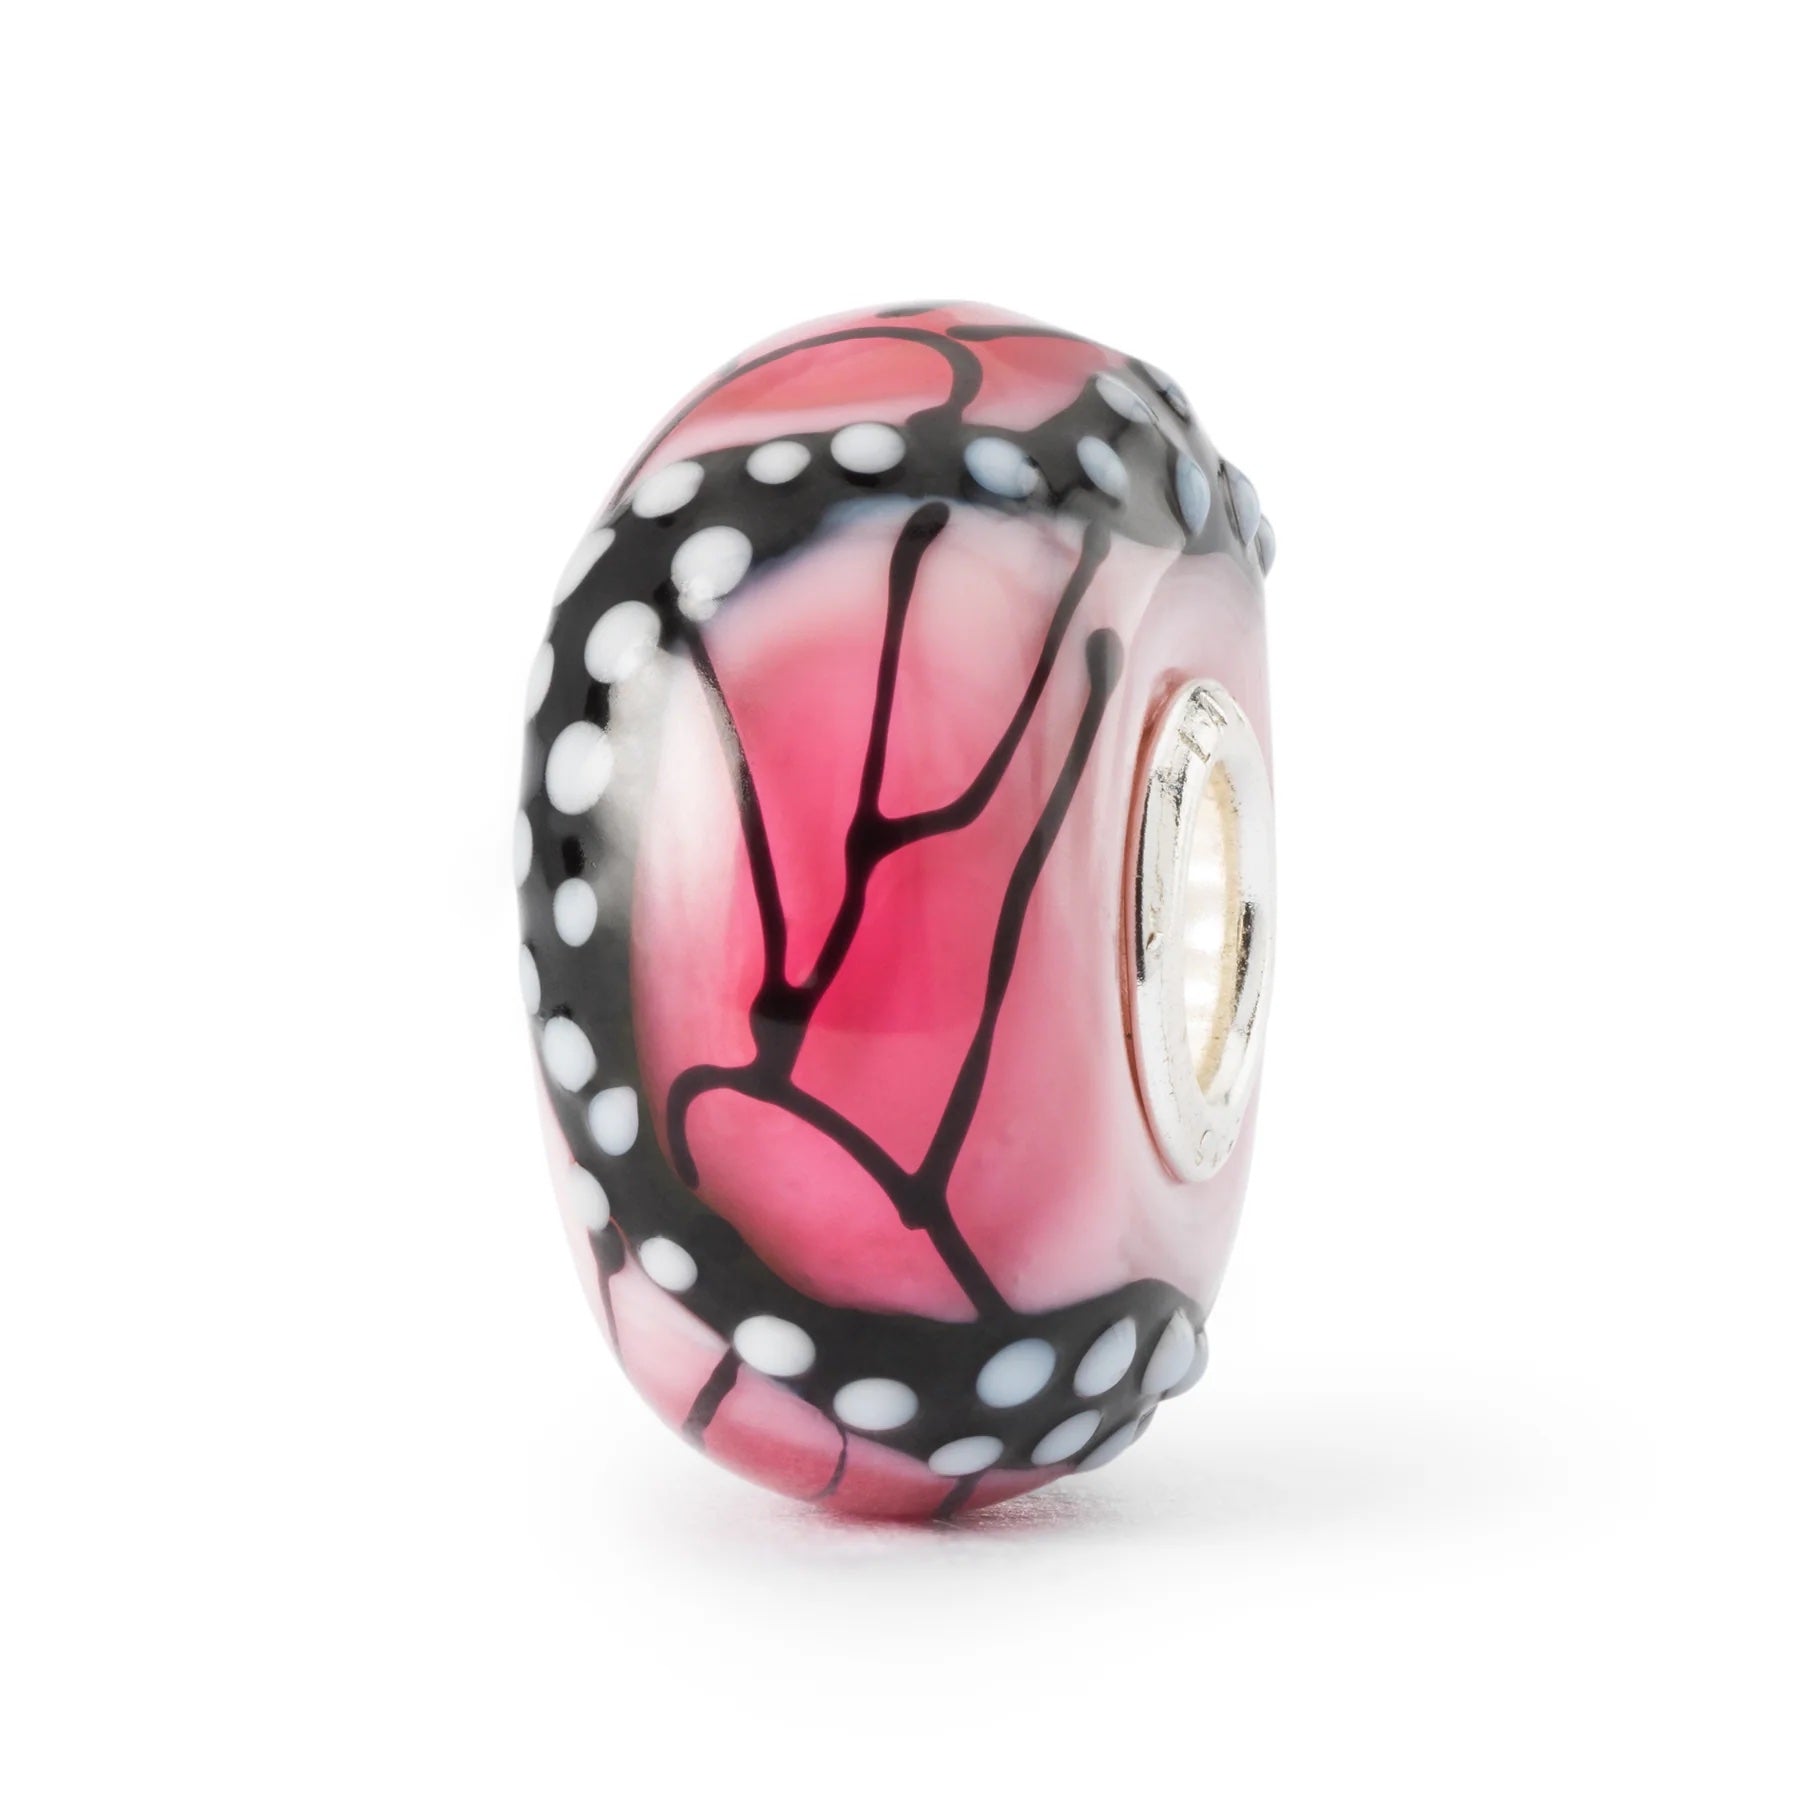 Trollbeads Wings of Passion Limited Edition Glass Bead